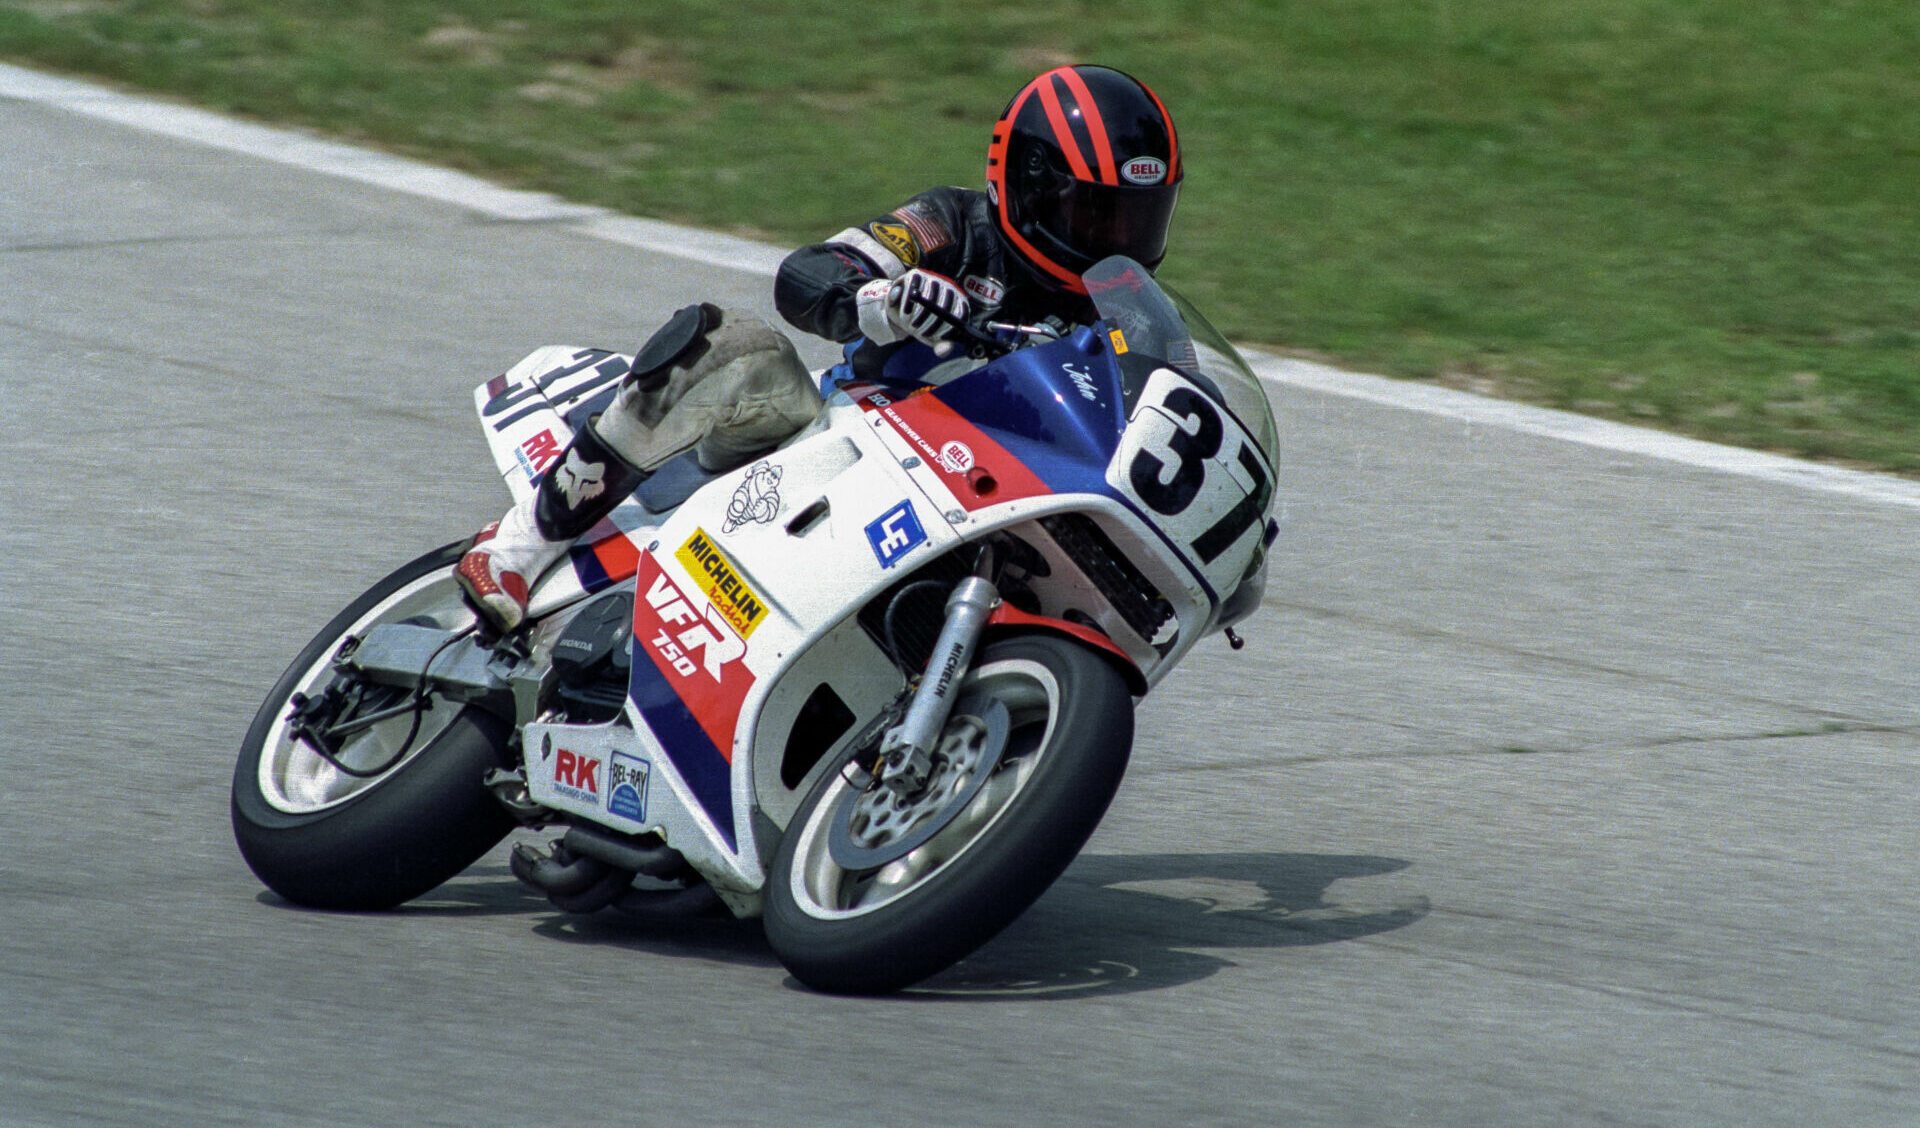 John Ashmead (37) back in the day on his Honda VFR750 Superbike. Photo by Brian J. Nelson.